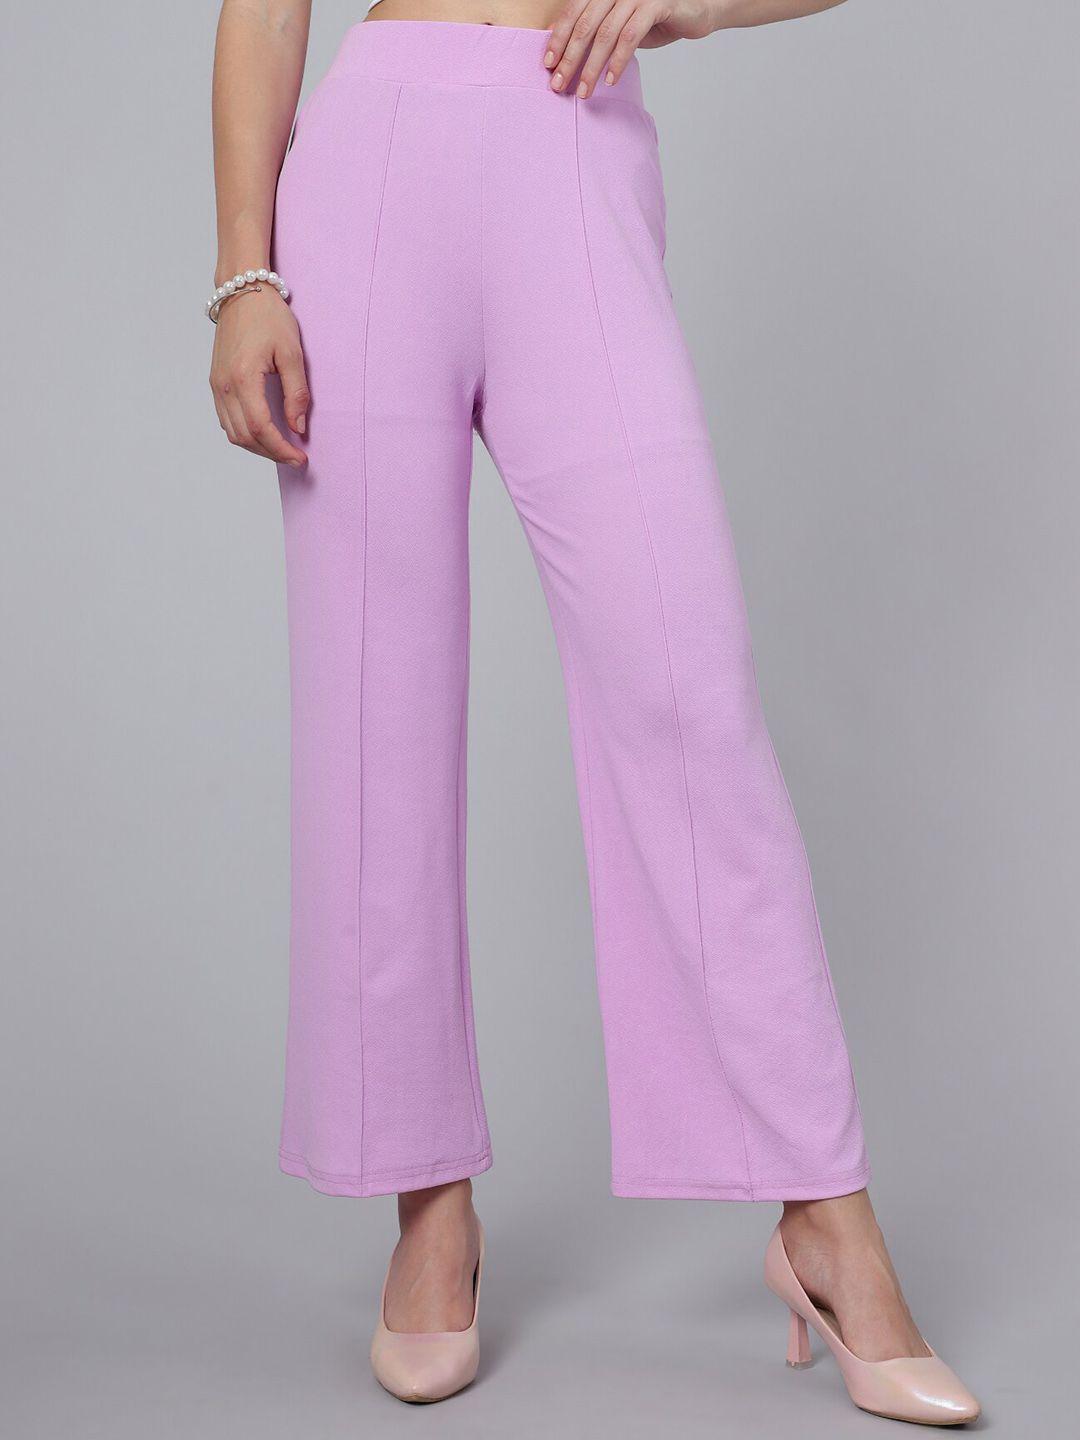 westhood-women-relaxed-straight-leg-straight-fit-high-rise-bootcut-trousers